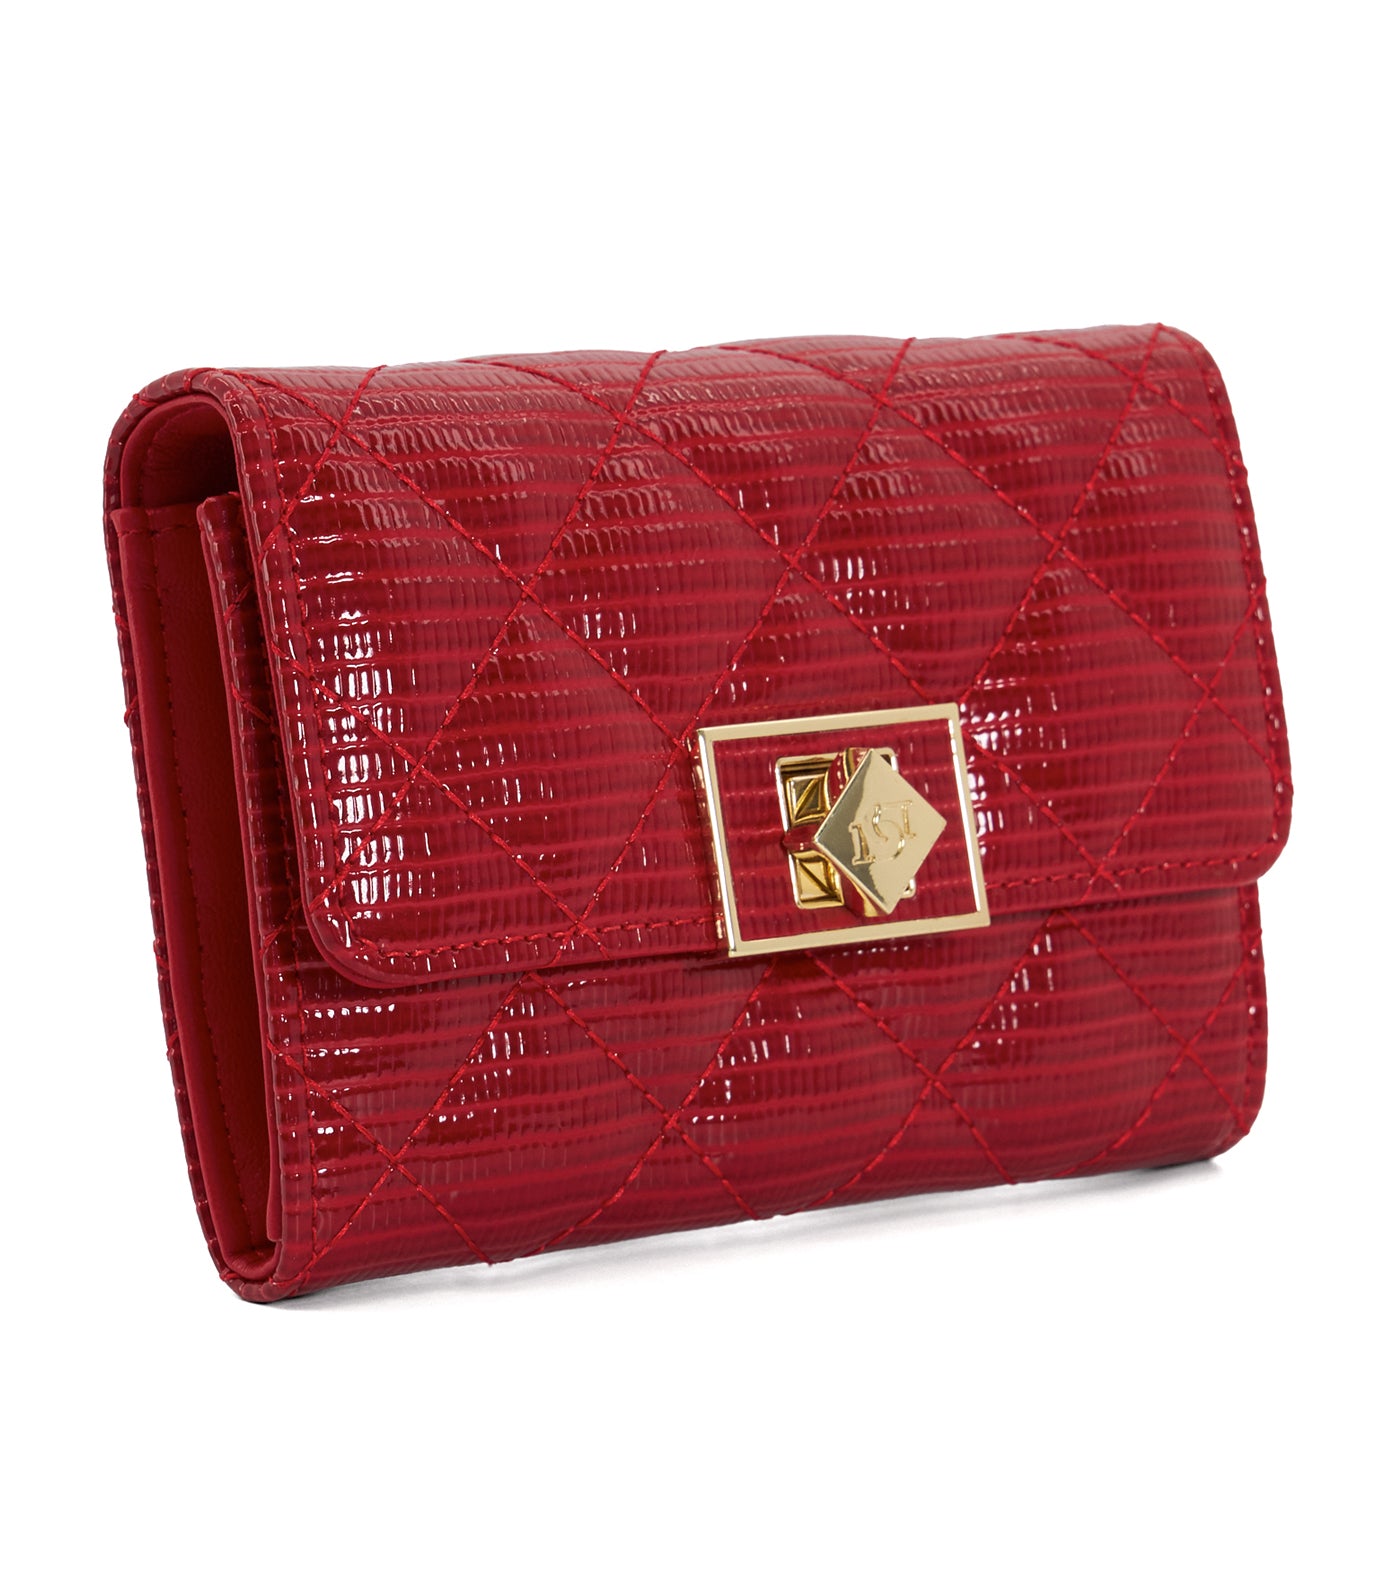 Karlys Purse Red